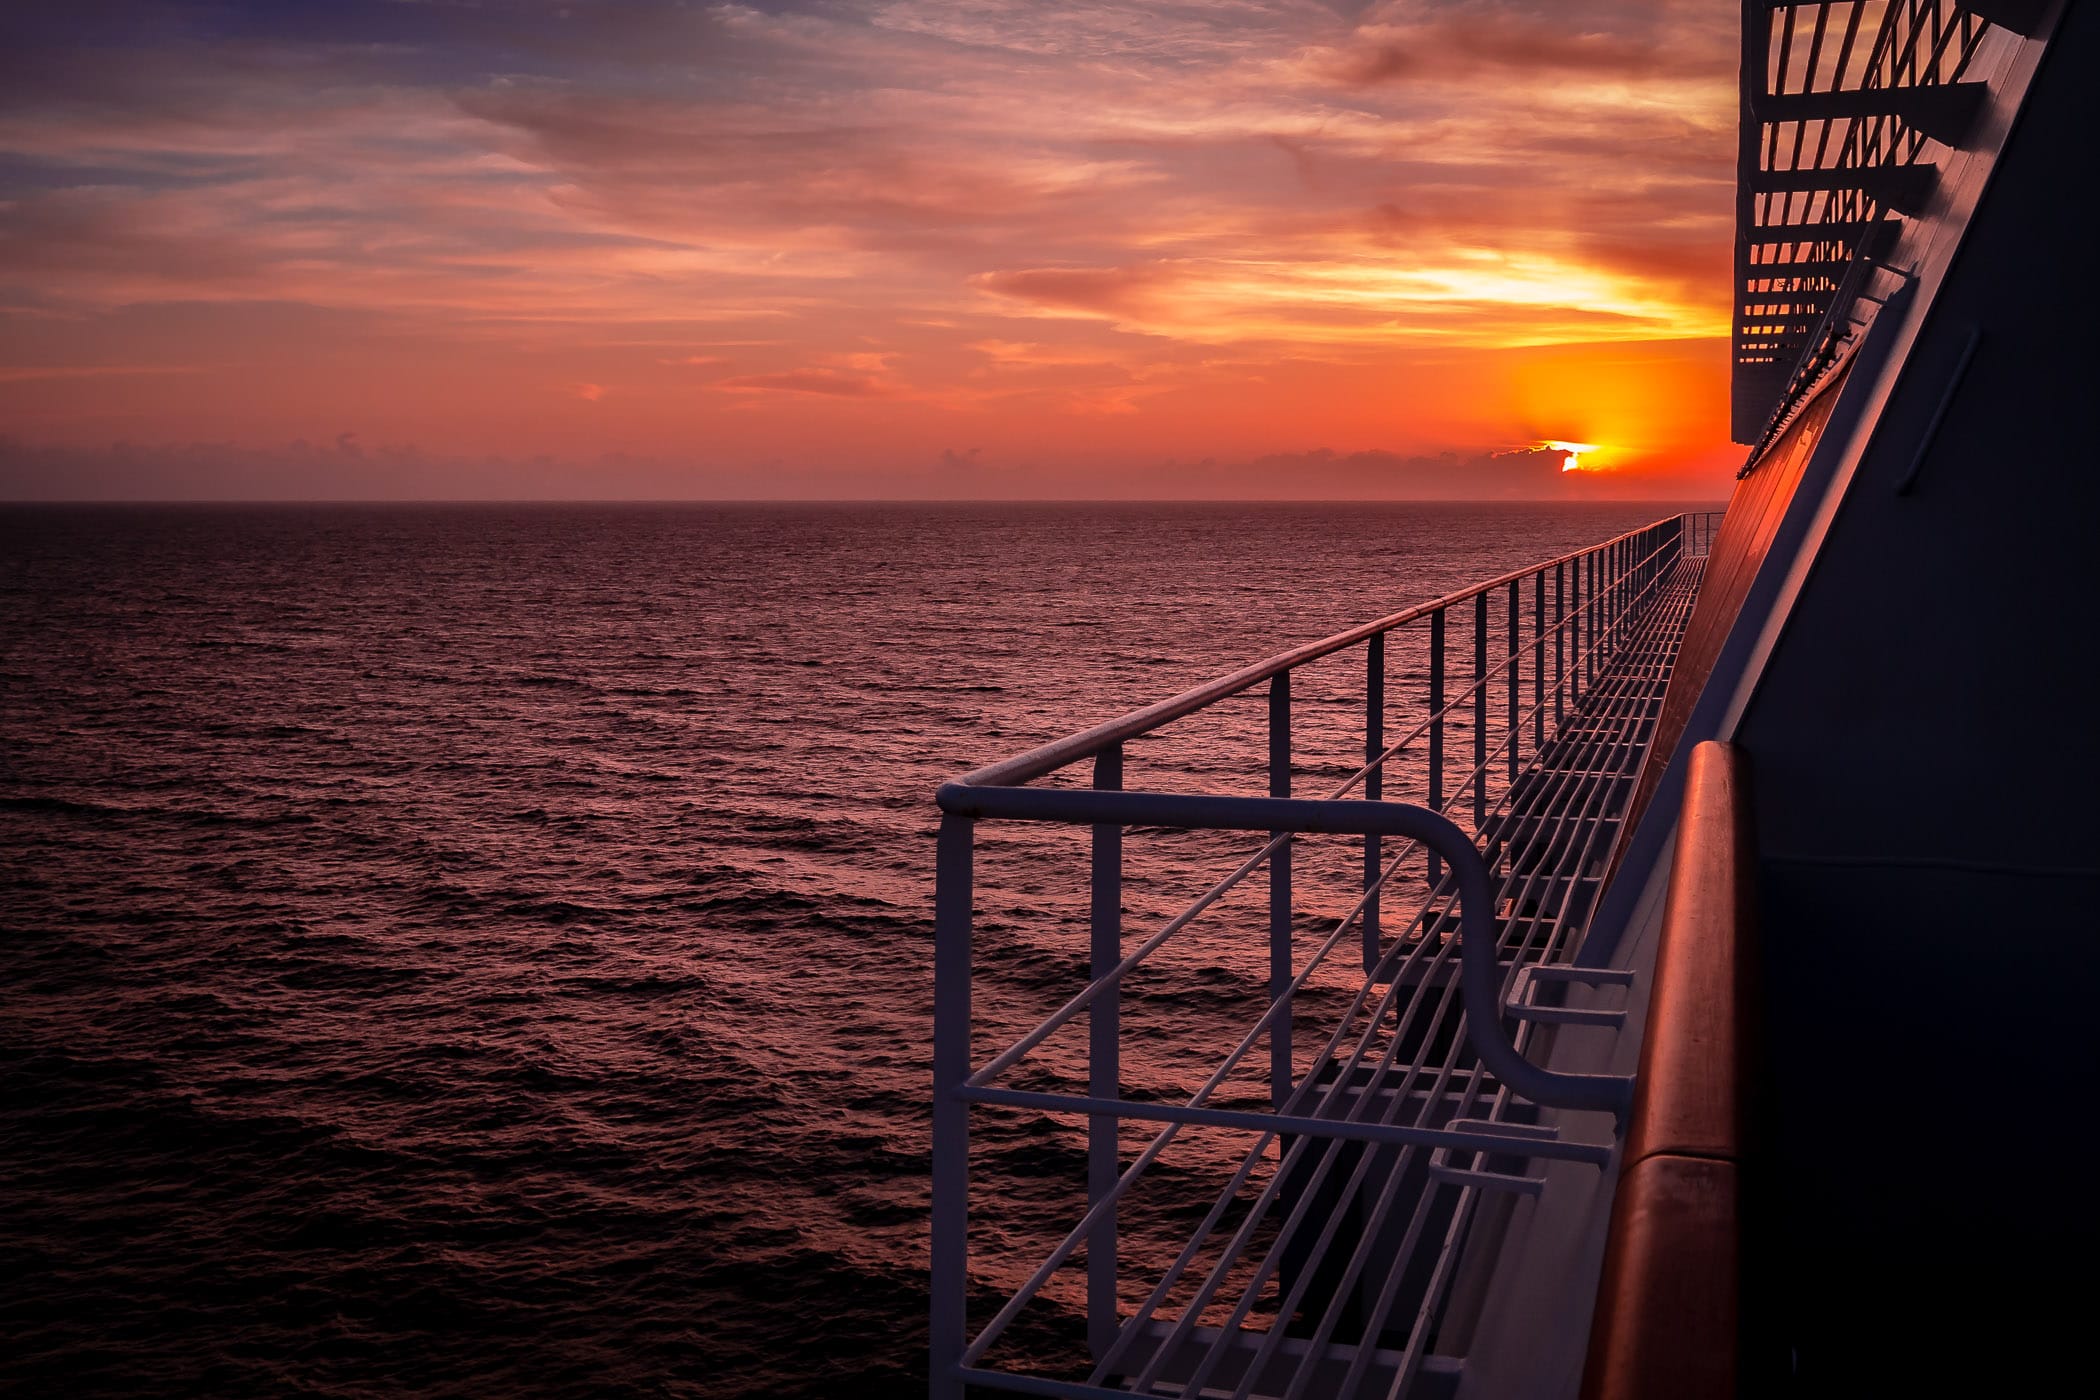 The sun rises over the Straits of Florida as seen from the cruise ship Carnival Magic.